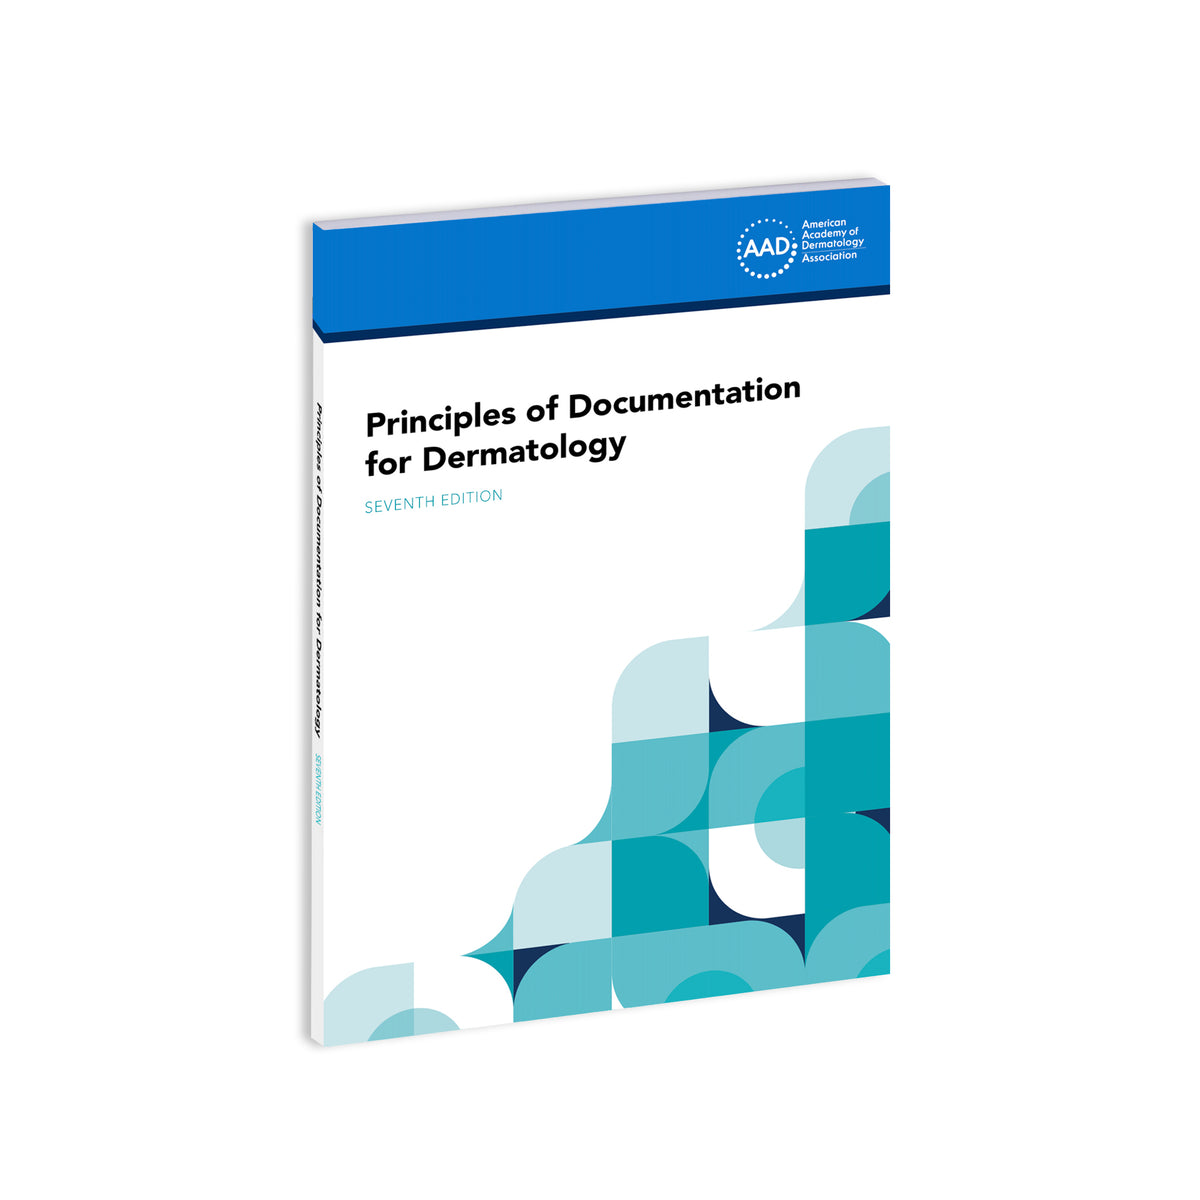 Principles of Documentation for Dermatology, Seventh Edition